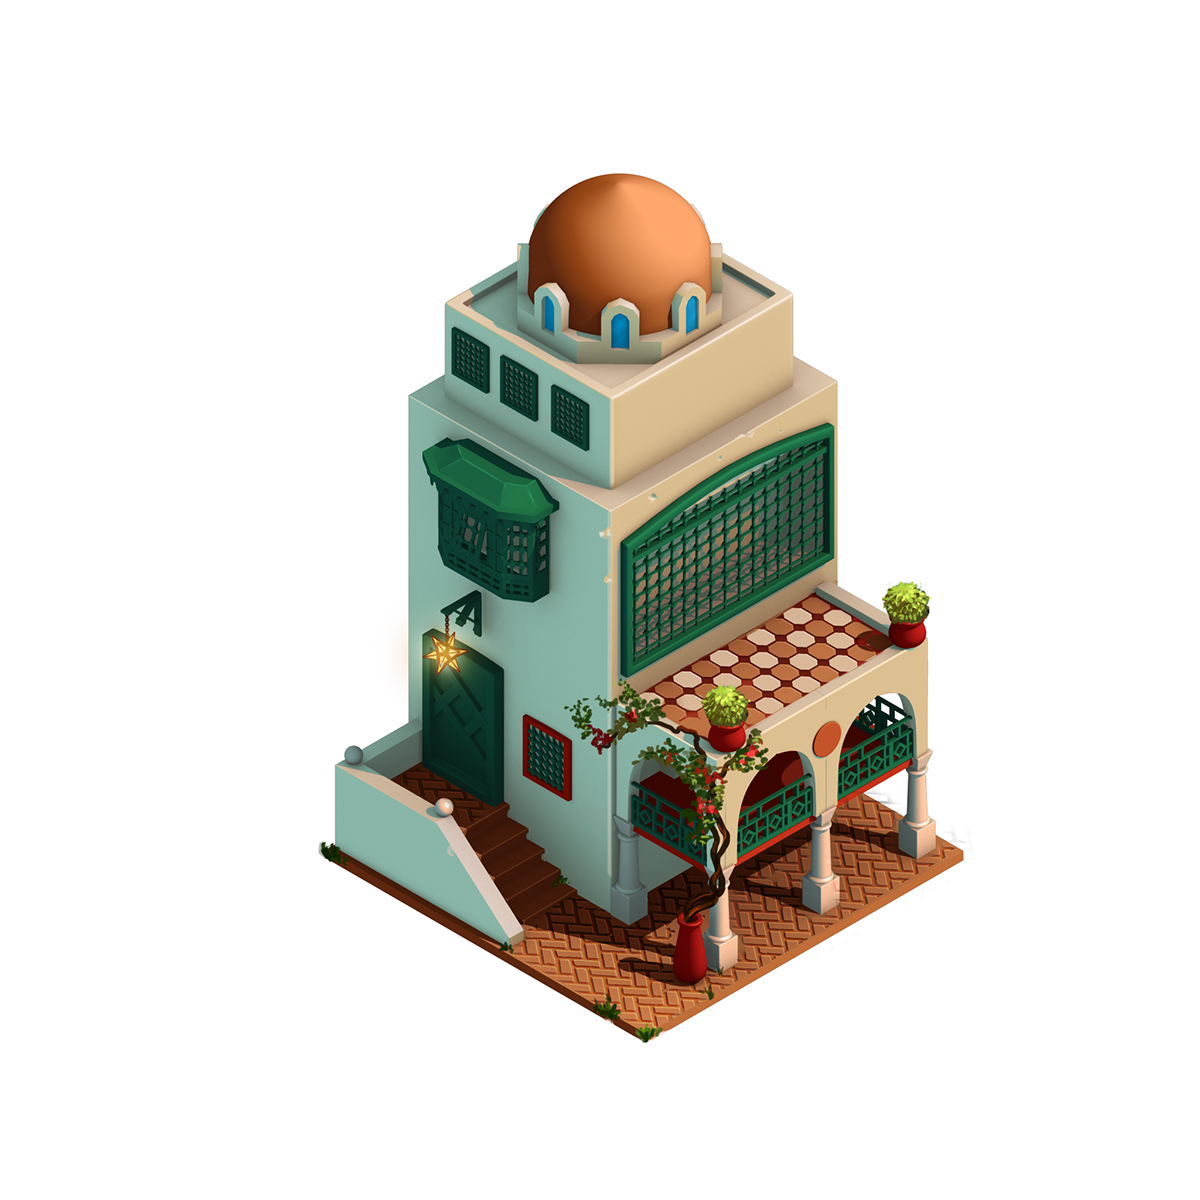 facebook game Isometric building modeling 3D